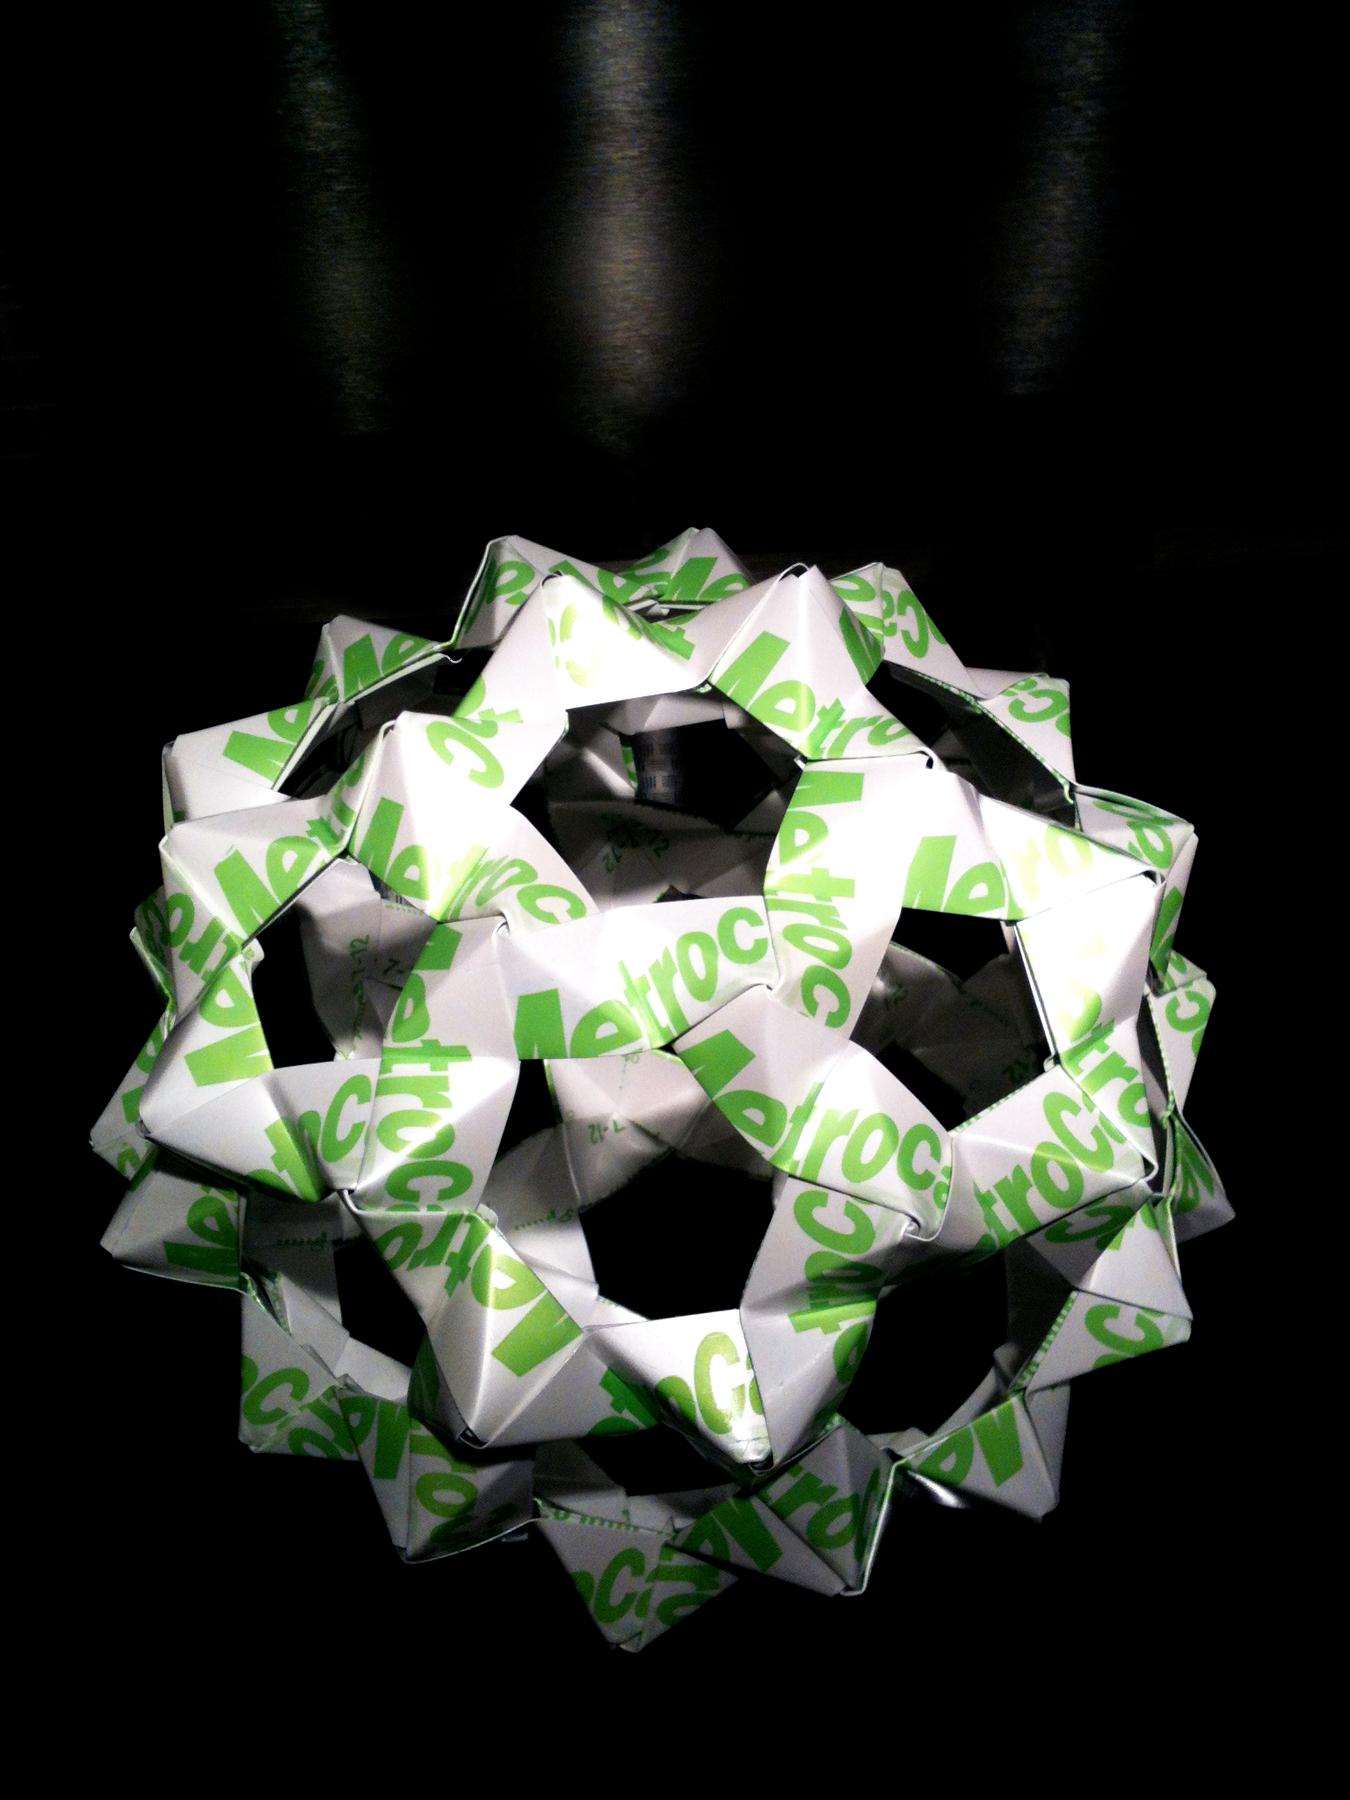 Image for entry 'NYC Metrocard PHiZZ unit Buckyball'